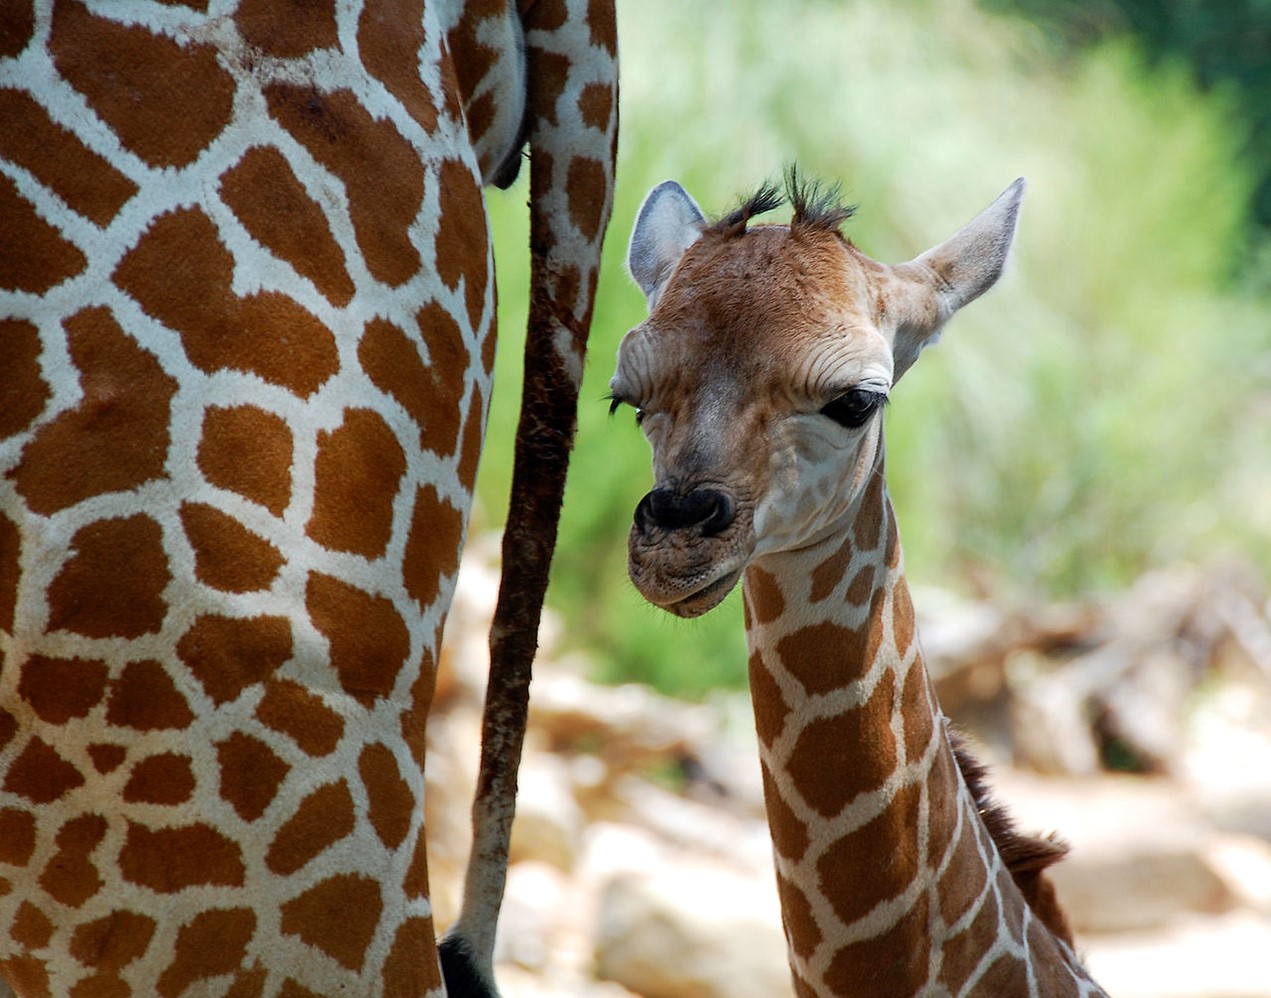 Baby giraffe stands by her mother